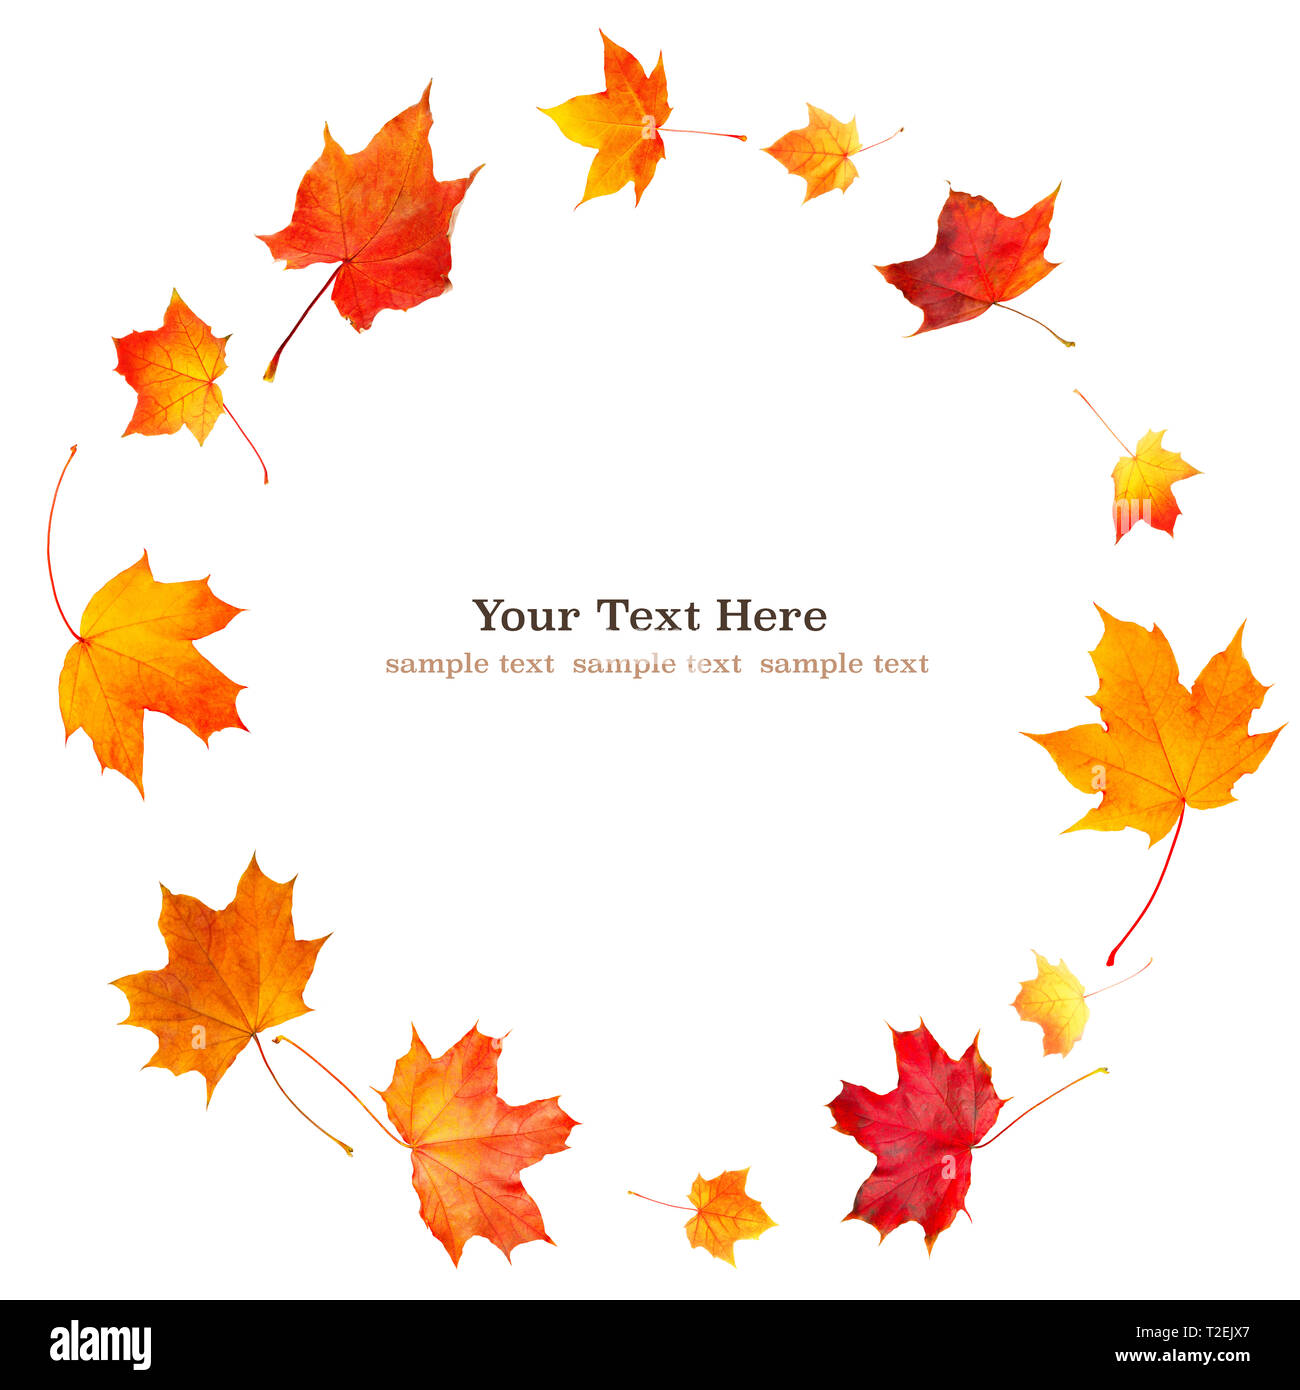 Spin circle of natural  autumn orange  leaves  Isolated on white background  for web banner with copy space for Your text. Stock Photo